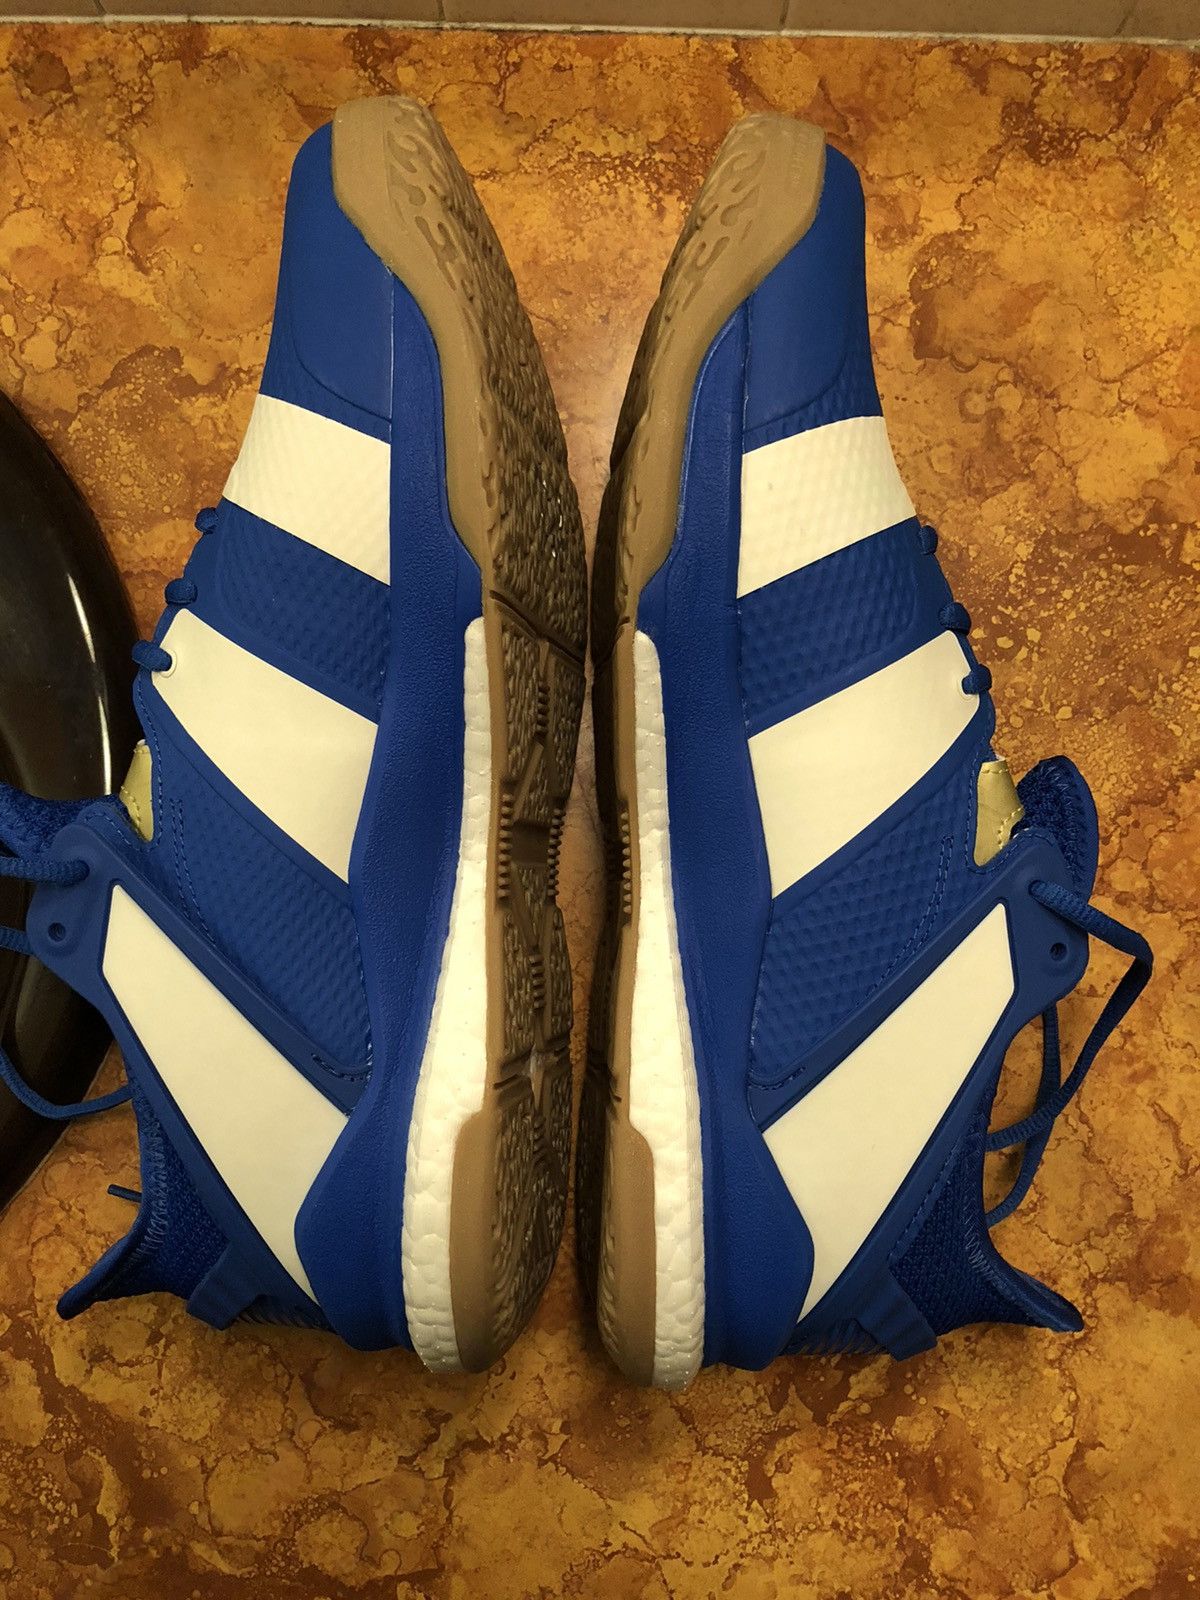 Adidas adidas Stabil X Men's Volleyball Shoes Blue/Gold Size US 12.5 / EU 45-46 - 7 Thumbnail